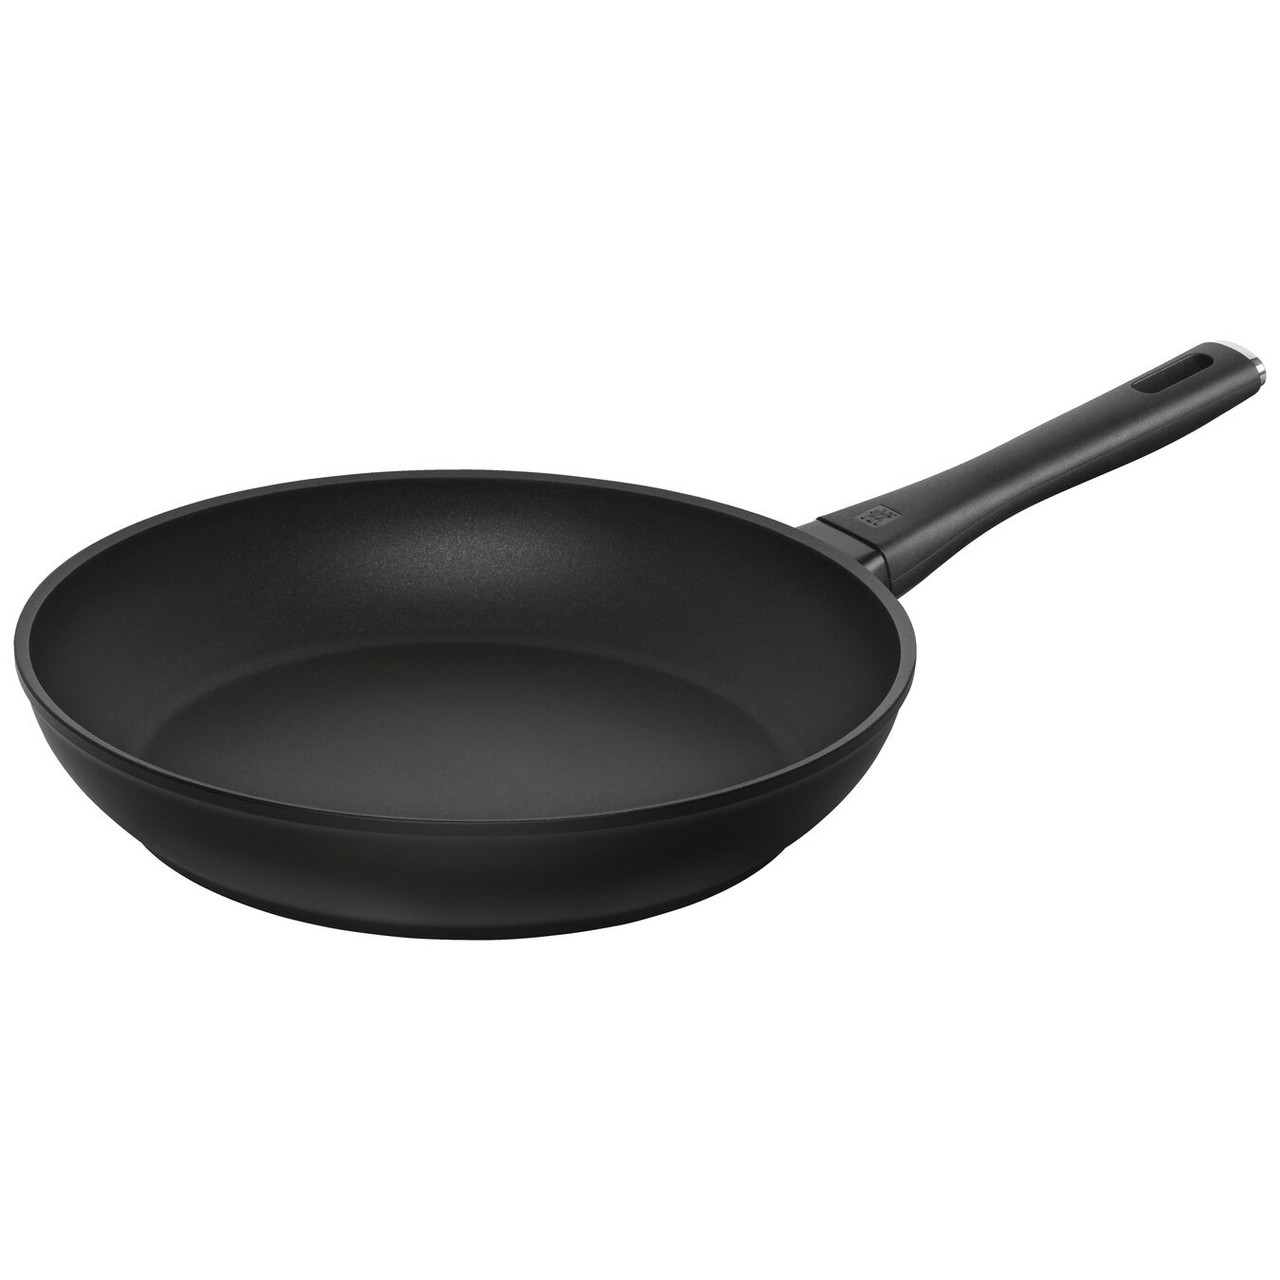 https://cdn11.bigcommerce.com/s-hccytny0od/images/stencil/1280x1280/products/3651/13027/zwilling-madura-plus-nonstick-fry-pan-11in__01800.1603290463.jpg?c=2?imbypass=on